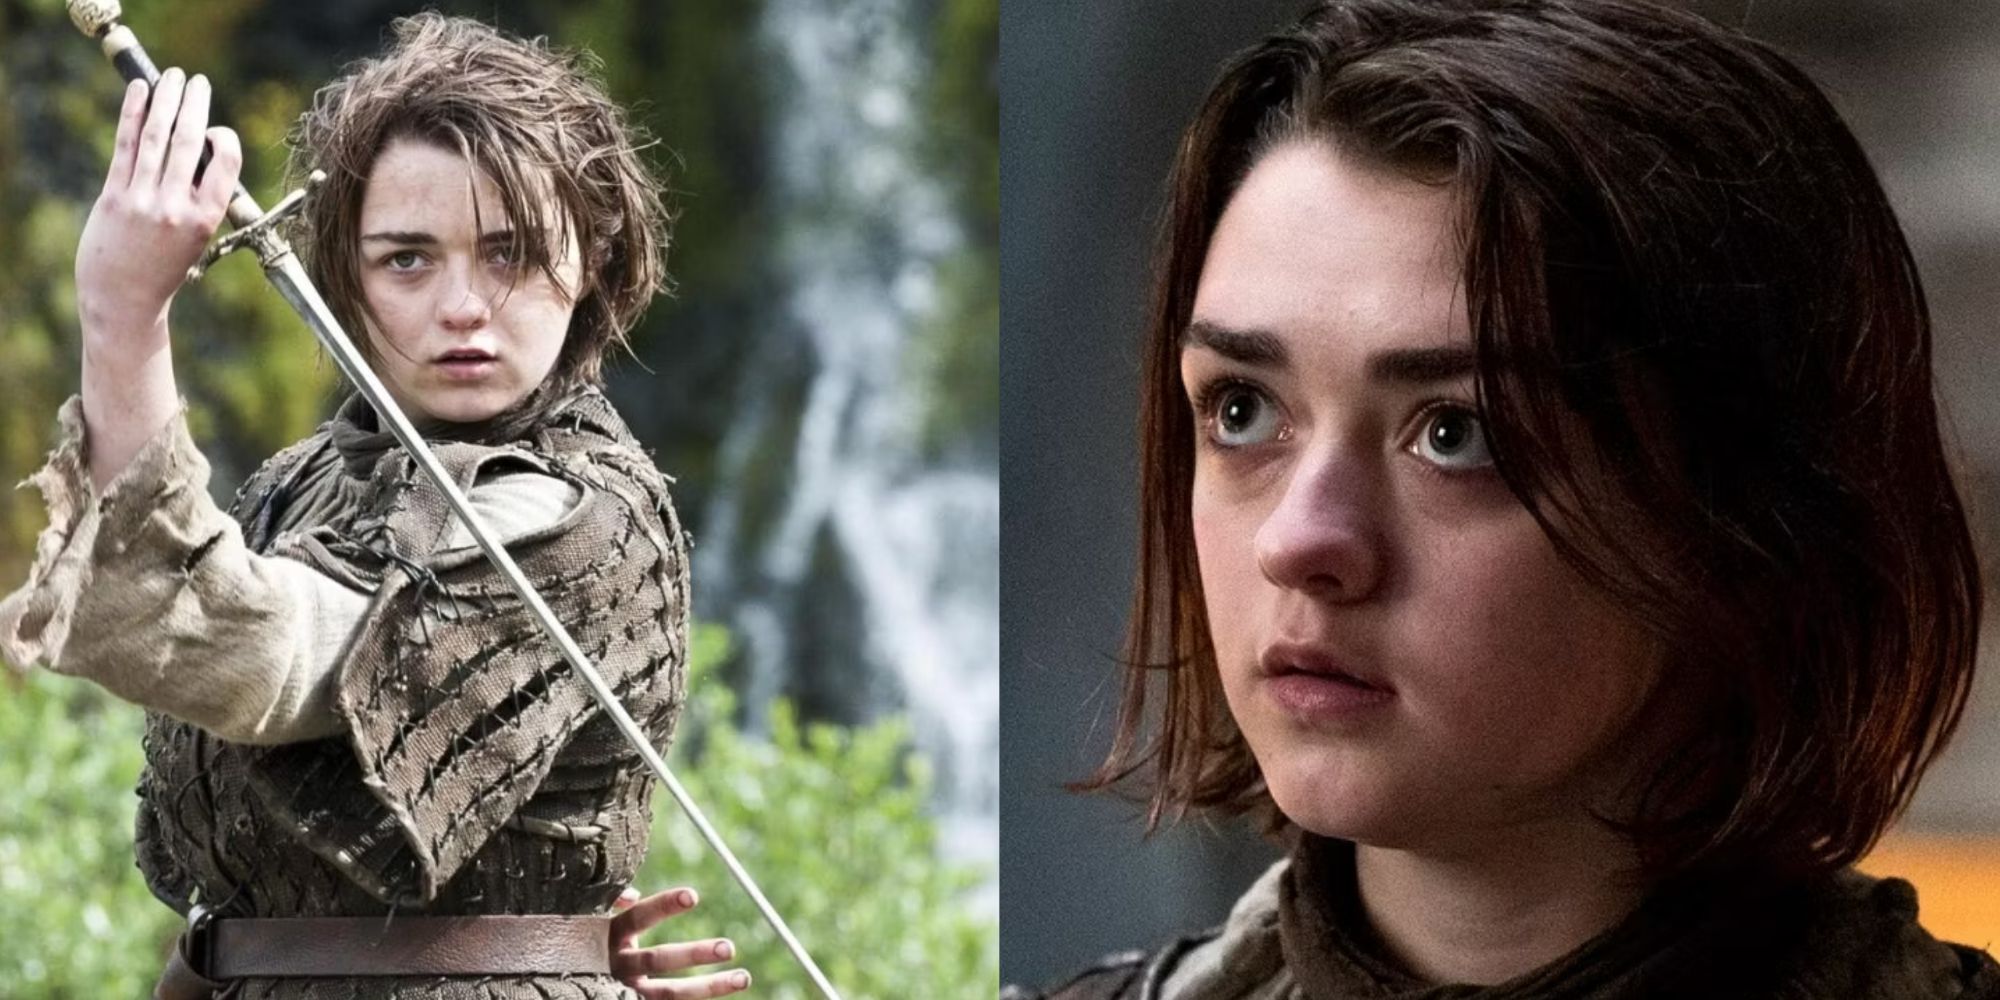 Game Of Thrones: 10 Arya Mannerisms & Traits From The Books Maisie Williams Nailed